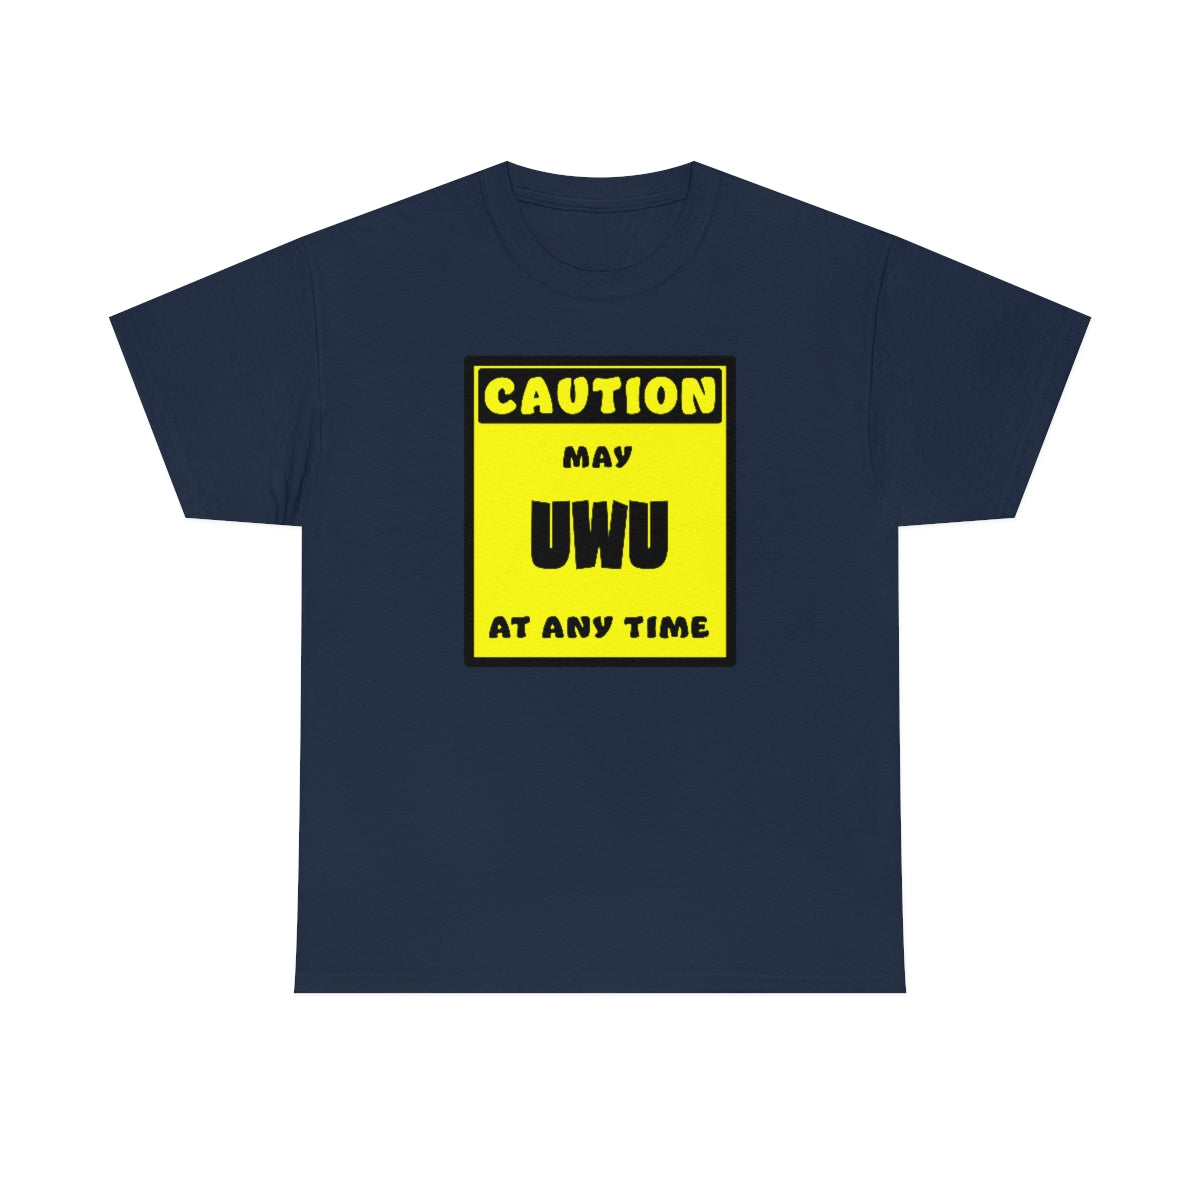 CAUTION! May UWU at any time! - T-Shirt T-Shirt AFLT-Whootorca Navy Blue S 